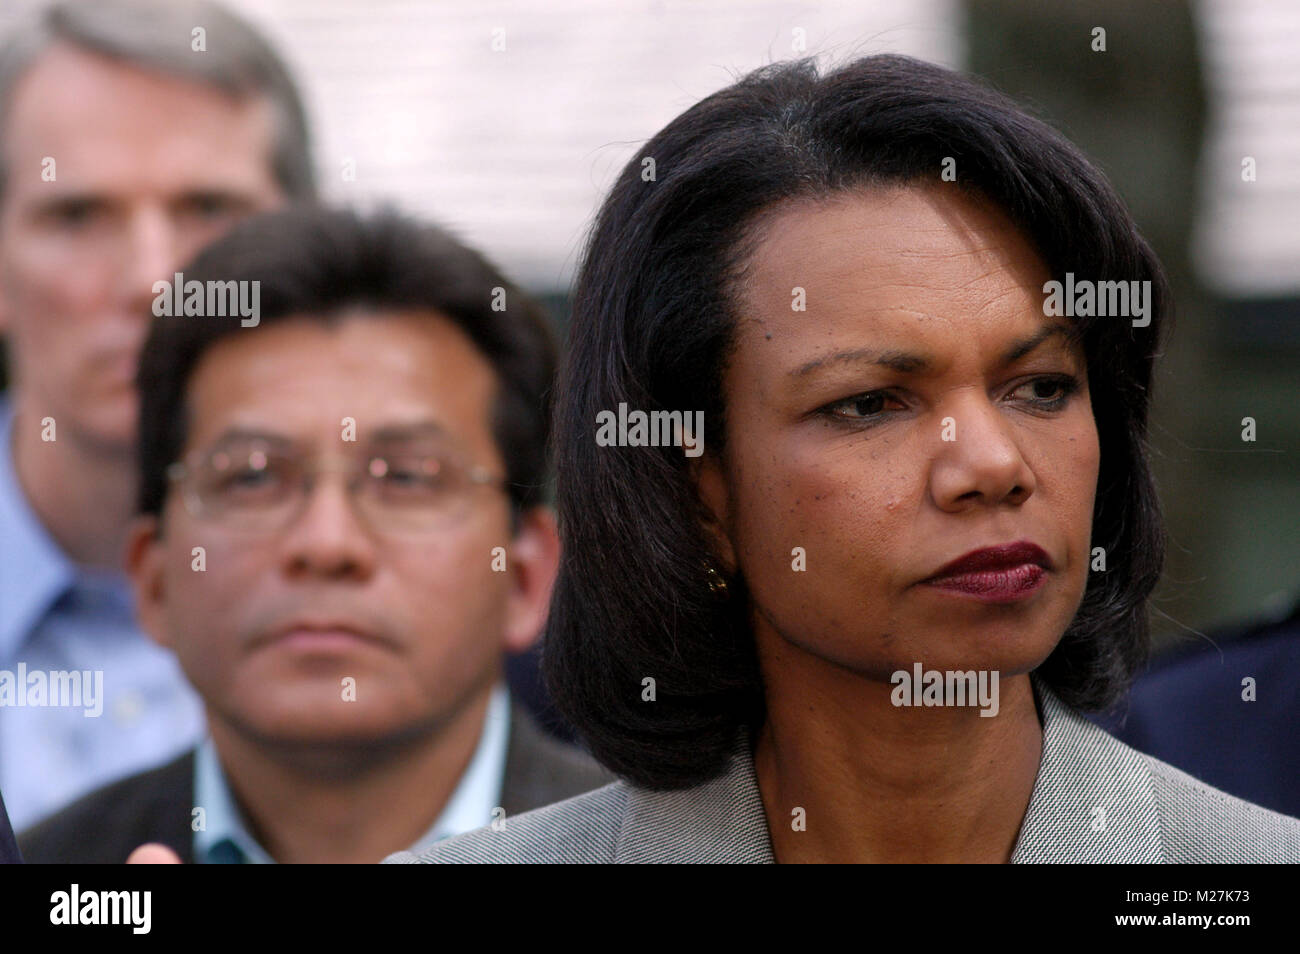 Camp David, MD - June 12, 2006 -- United States Secretary of State Condoleezza Rice watches as President George W. Bush speaks to members of the press about his meetings with top advisors at Camp David. President Bush held the meetings to reassess US military strategy in the war in Iraq.  Attorney General Alberto Gonzales is at left. Credit: Evan F. Sisley - Pool via CNP /MediaPunch Stock Photo